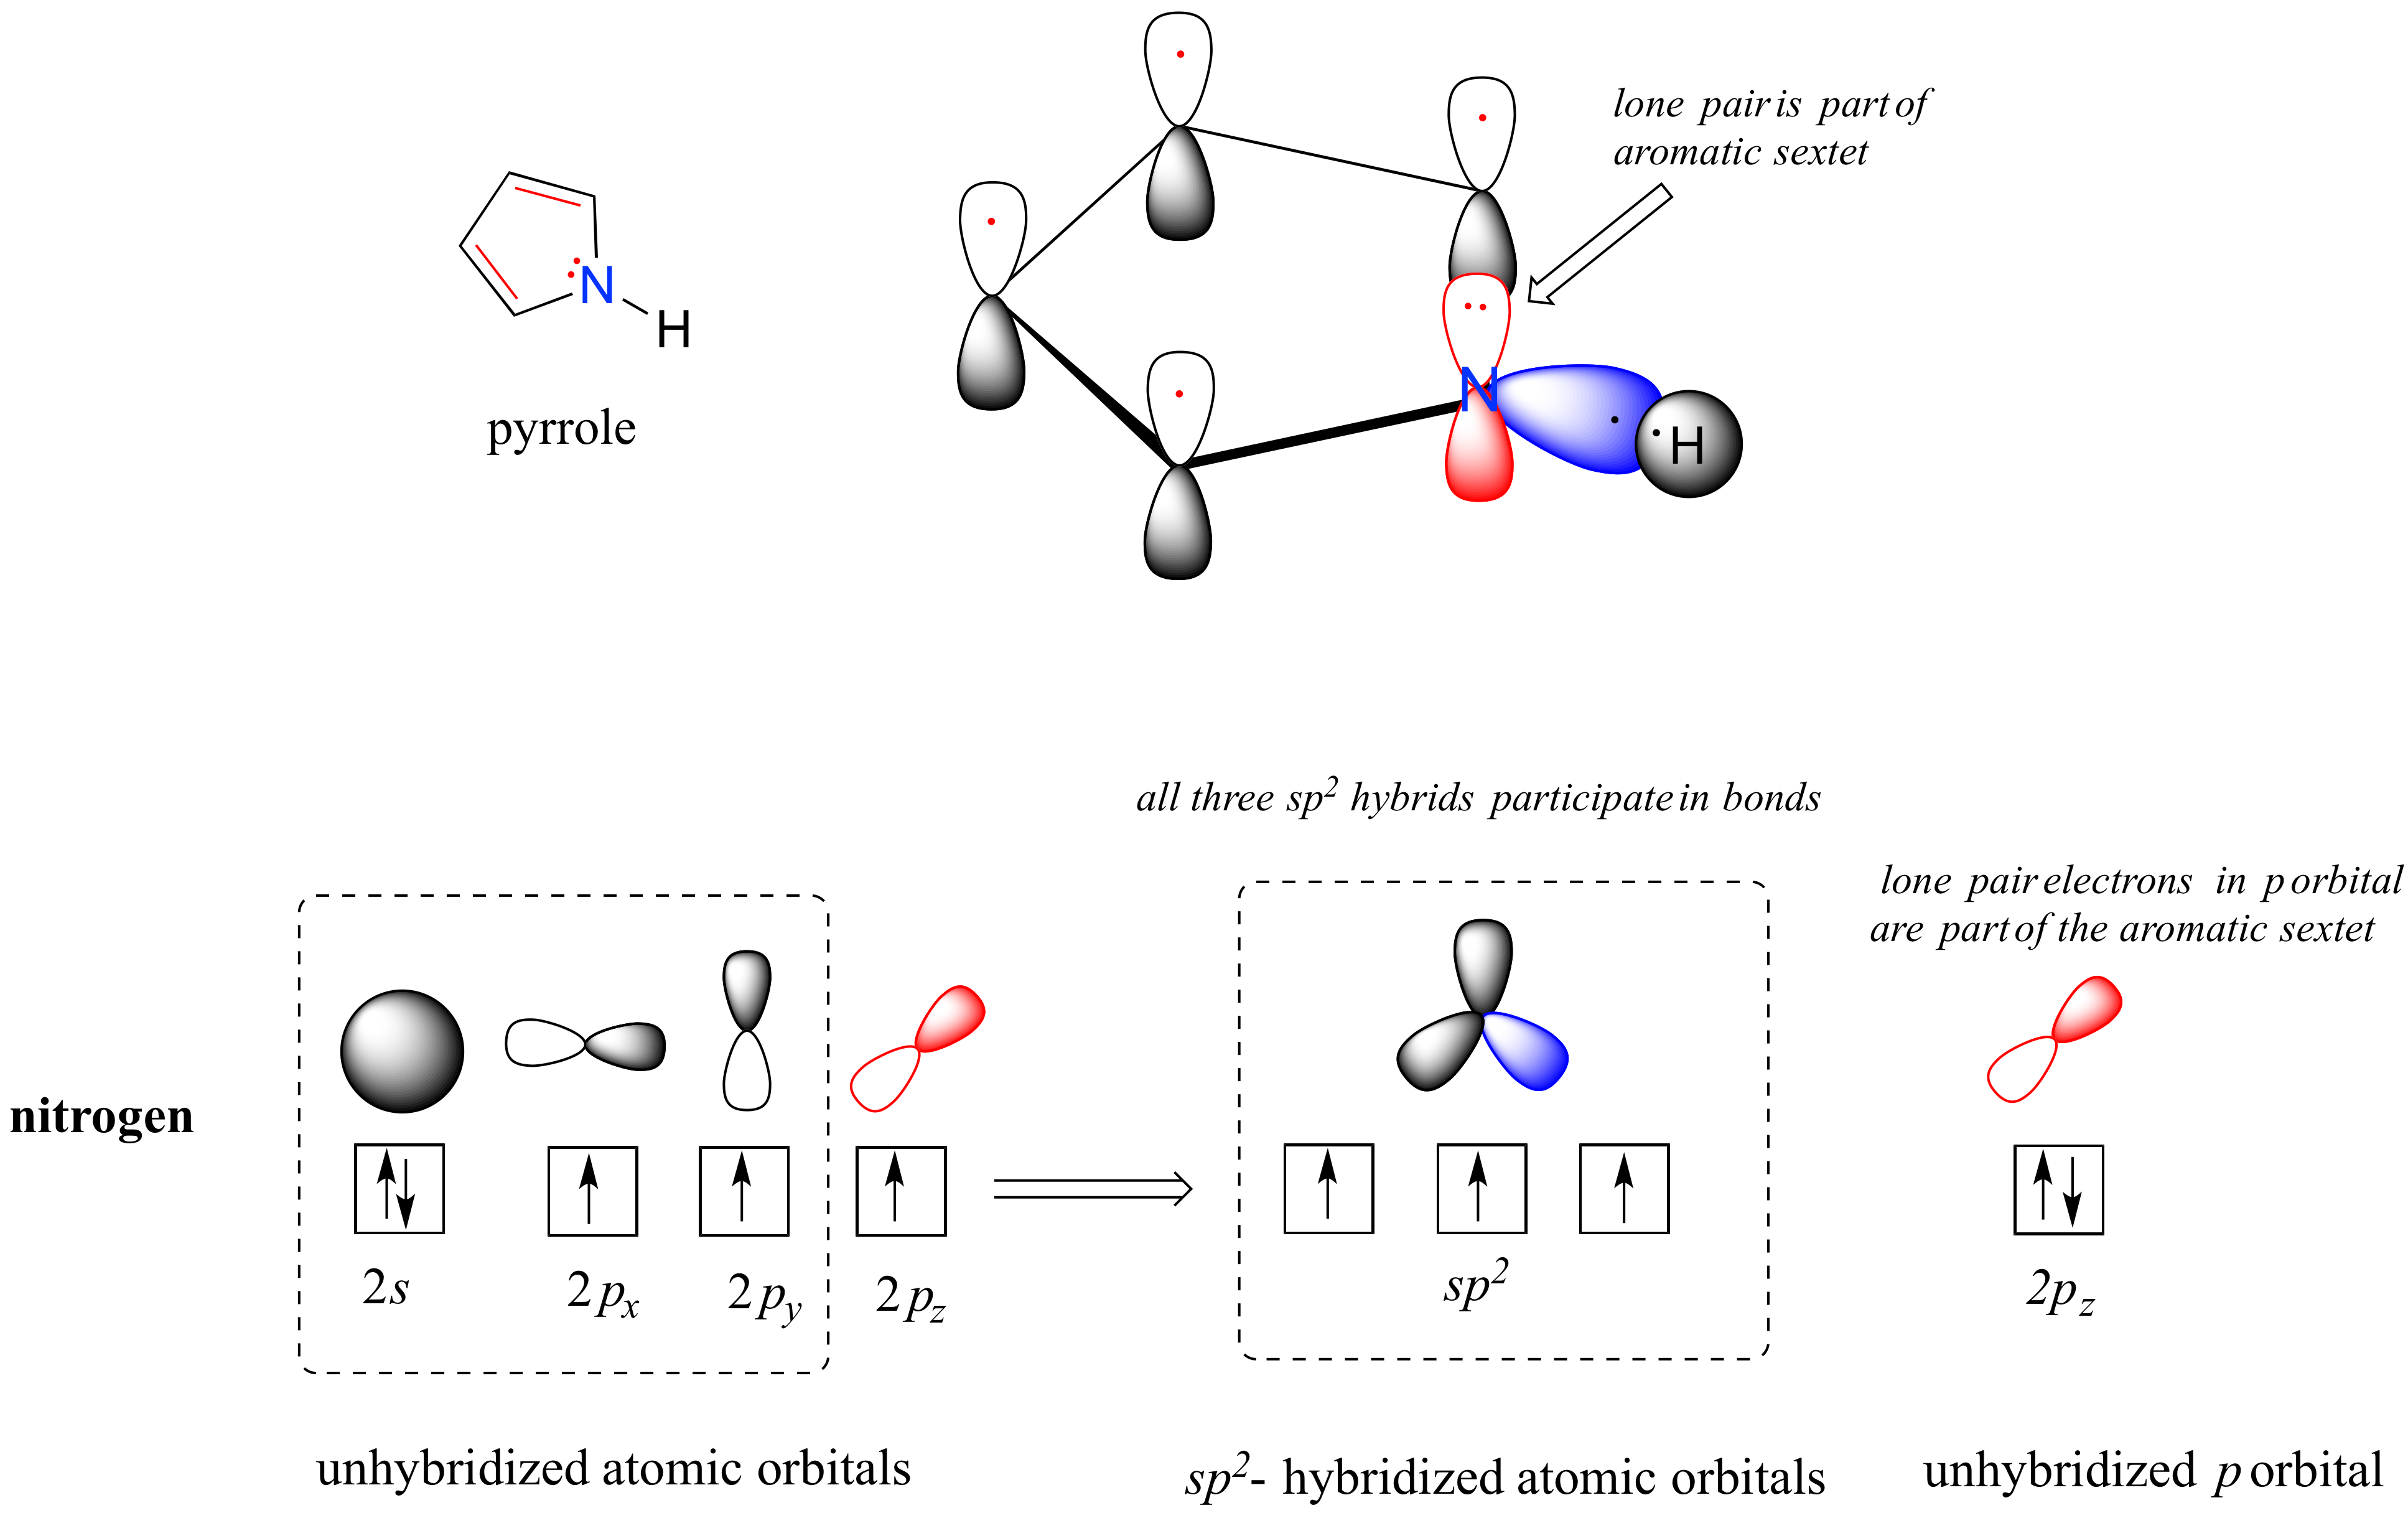 The nitrogen in pyrrole has a full 2 s orbital and three unpaired electrons in the 2 p orbital. After hybridizing, the nitrogen has three unpaired electrons in the s p 2 orbital and a lone pair in the unhybridized p orbital. 